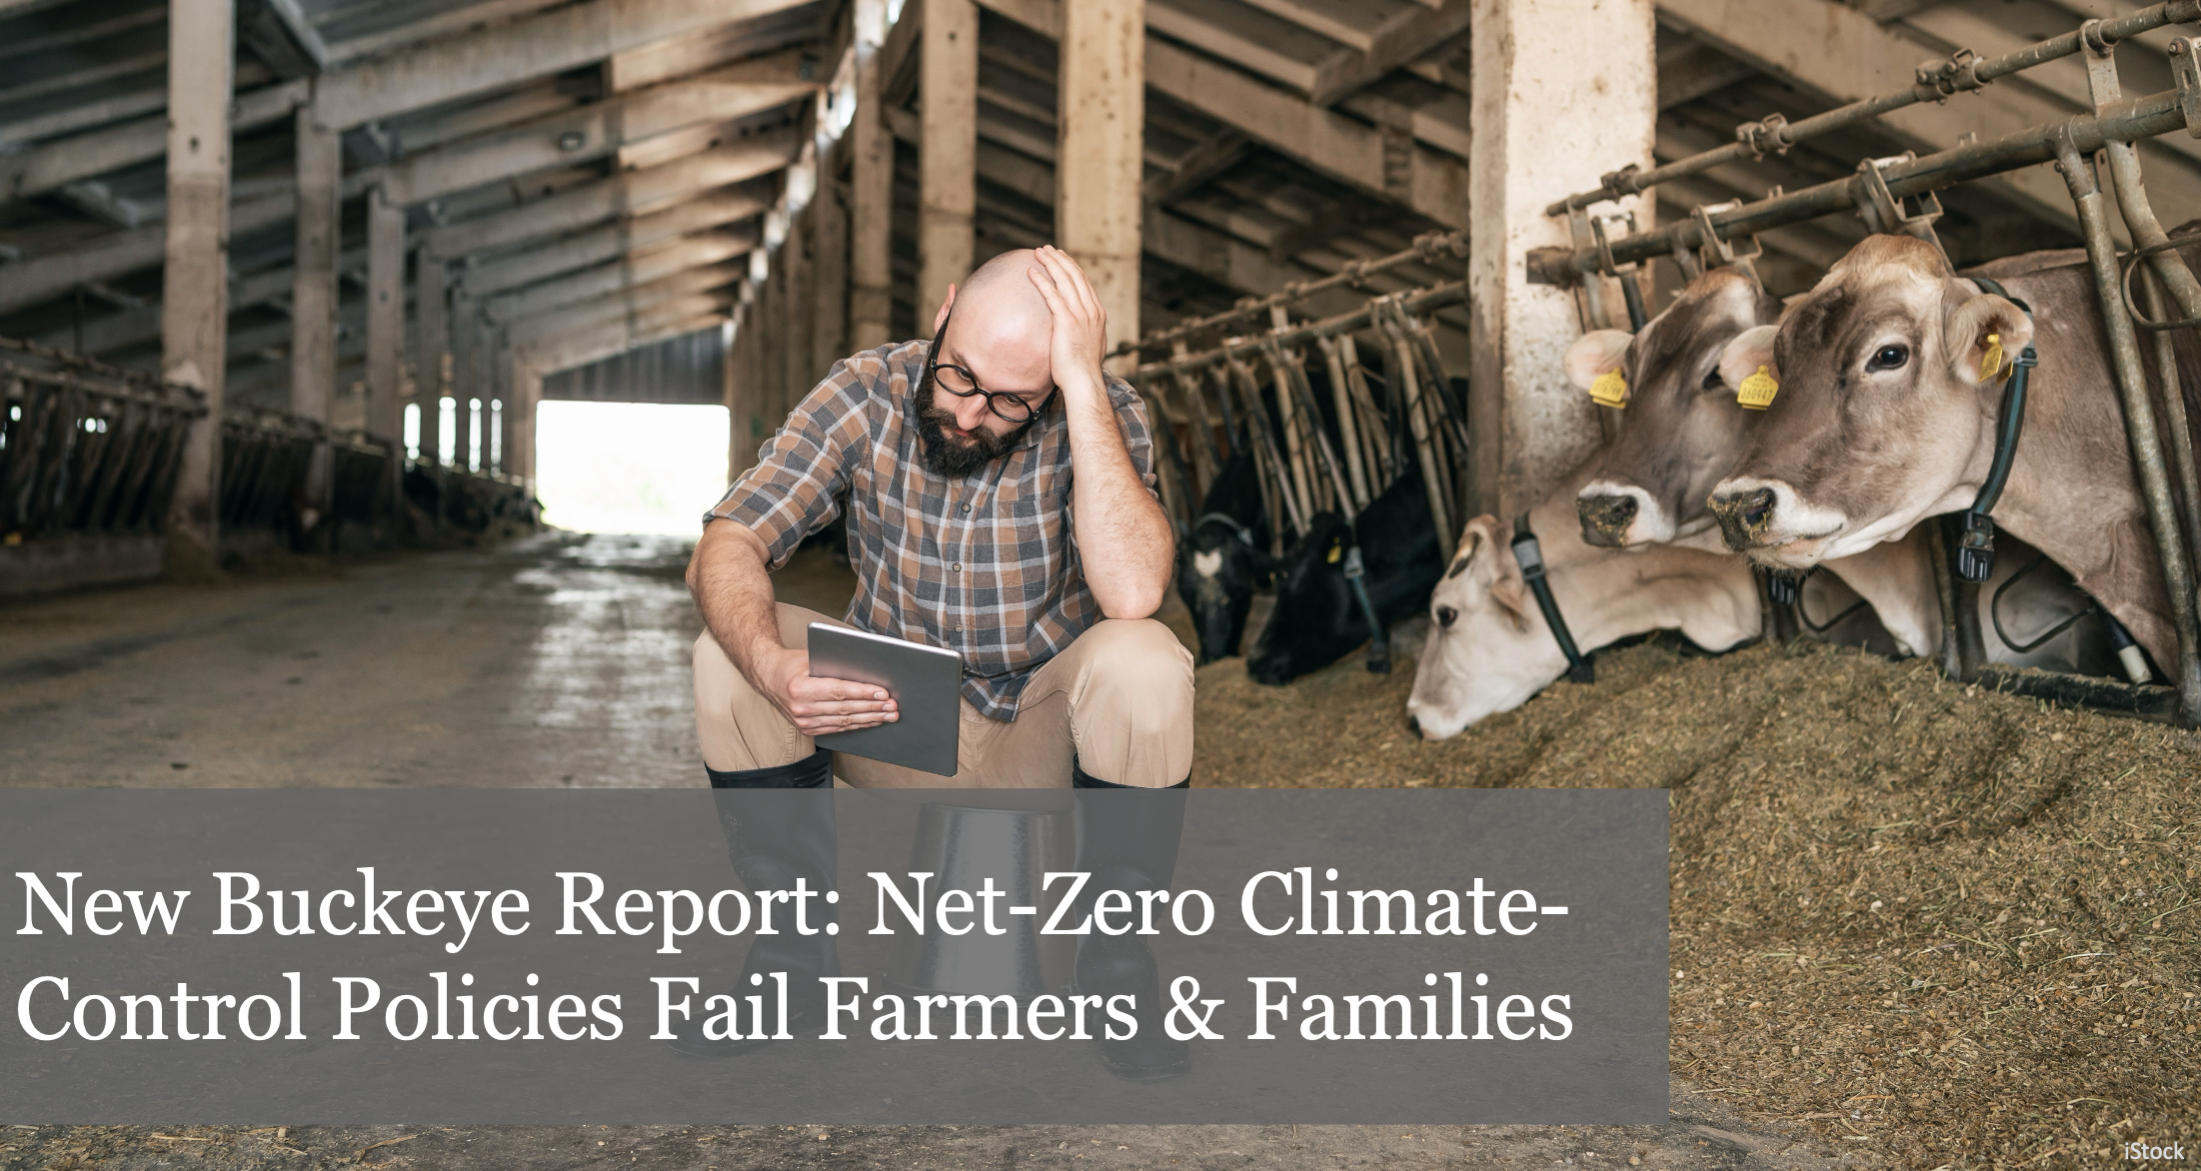 New Buckeye Institute Report Finds Net-Zero Climate-Control Policies Fail Farmers & Families